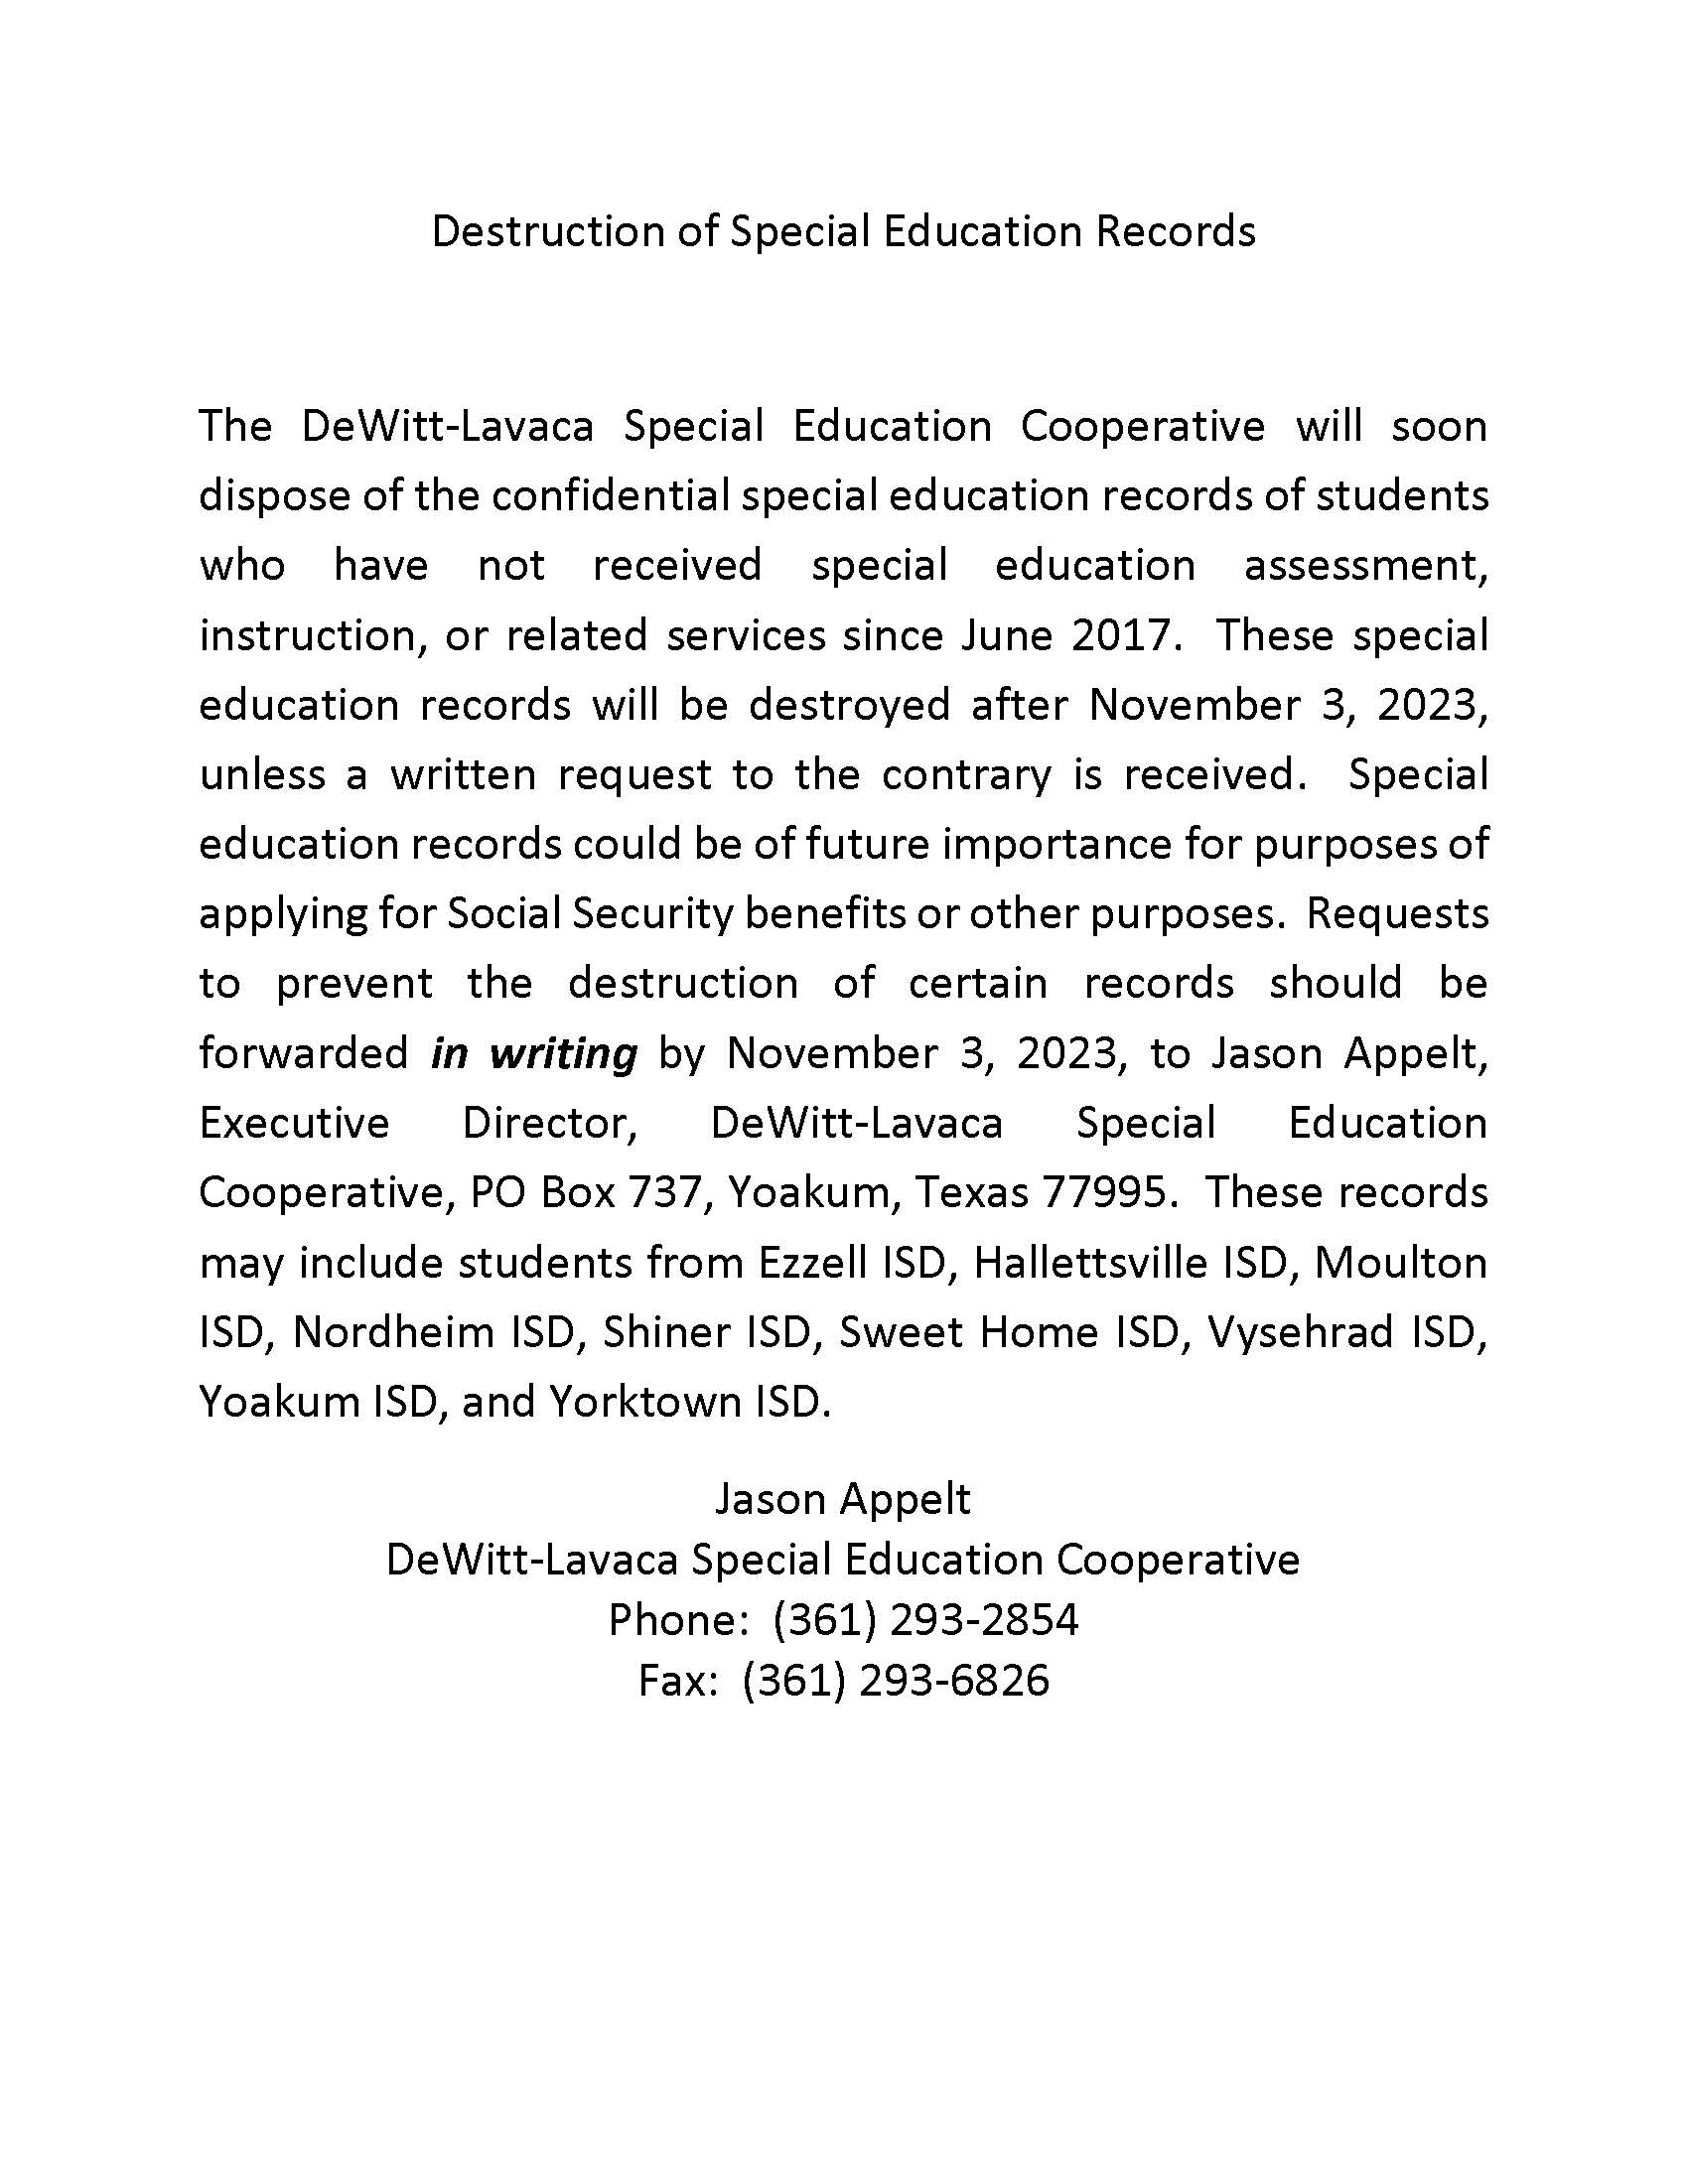 Destruction of Special Education Records    The DeWitt-Lavaca Special Education Cooperative will soon dispose of the confidential special education records of students who have not received special education assessment, instruction, or related services since June 2017.  These special education records will be destroyed after November 3, 2023, unless a written request to the contrary is received.  Special education records could be of future importance for purposes of applying for Social Security benefits or other purposes.  Requests to prevent the destruction of certain records should be forwarded in writing by November 3, 2023, to Jason Appelt, Executive Director, DeWitt-Lavaca Special Education Cooperative, PO Box 737, Yoakum, Texas 77995.  These records may include students from Ezzell ISD, Hallettsville ISD, Moulton ISD, Nordheim ISD, Shiner ISD, Sweet Home ISD, Vysehrad ISD, Yoakum ISD, and Yorktown ISD.   